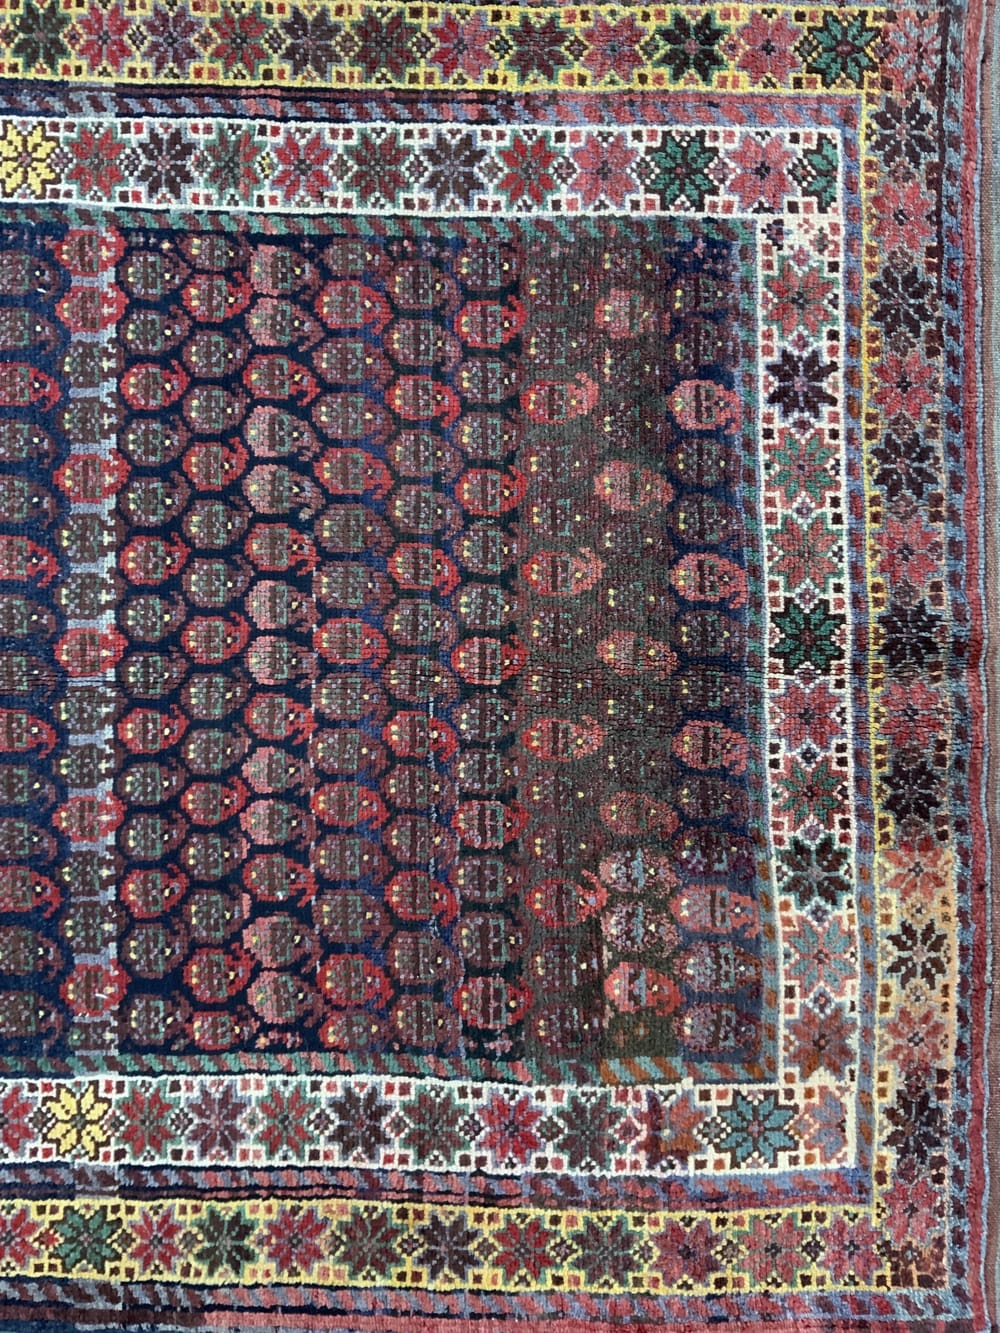 Rug#10576 Antique Caucasian, Day-Bed rug, circa1900, all wool rare & collectable, Persia, size 253x124cm (4)